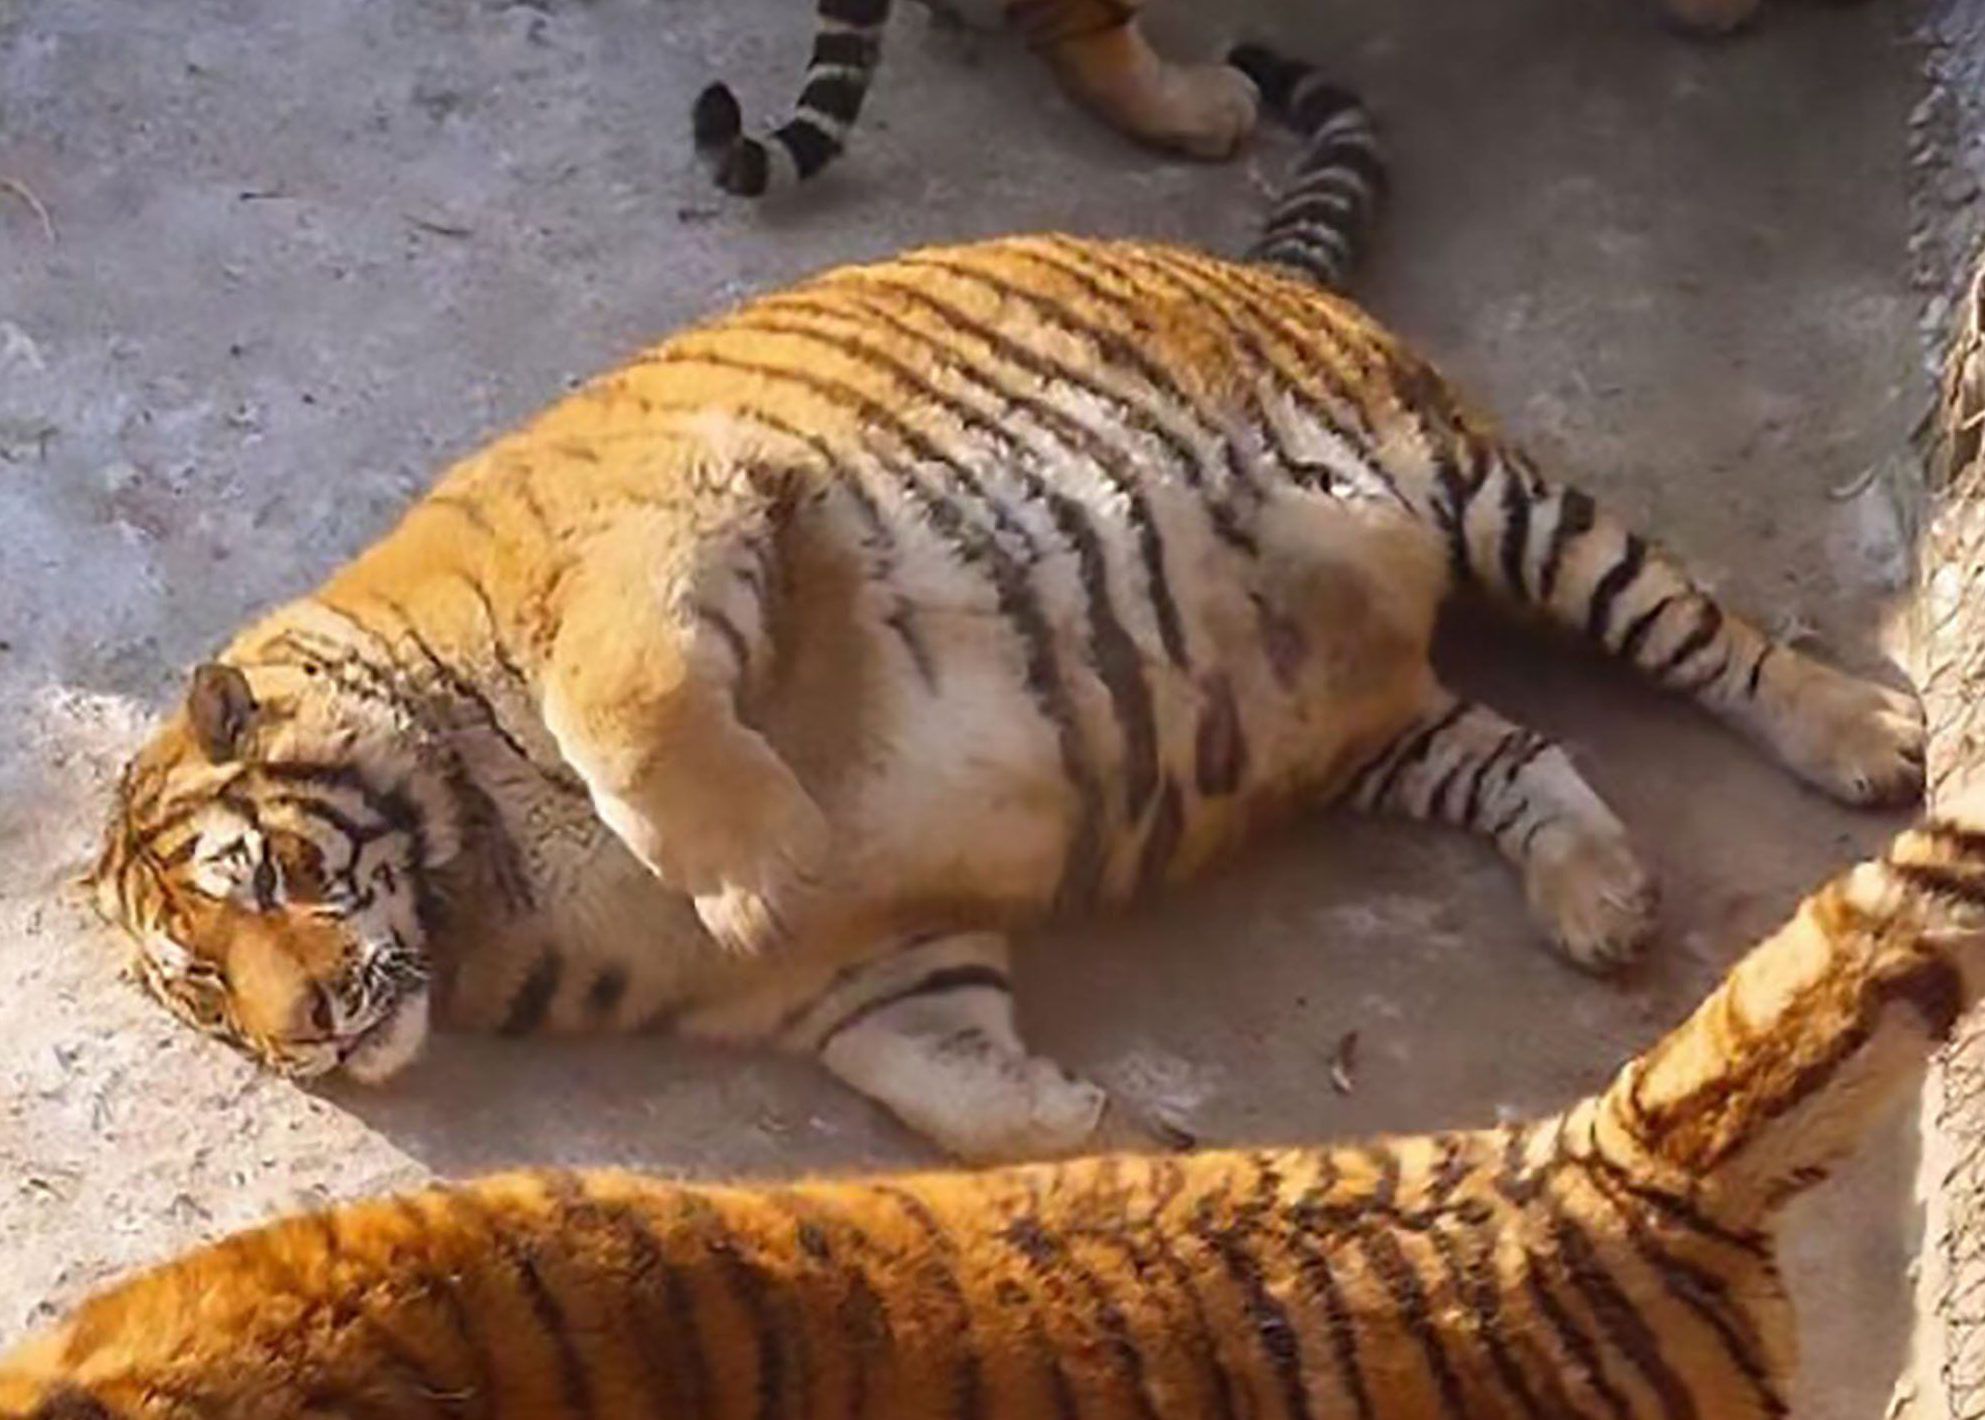 Photos of obese tigers lying around Harbin Tiger Park spark concerns ...